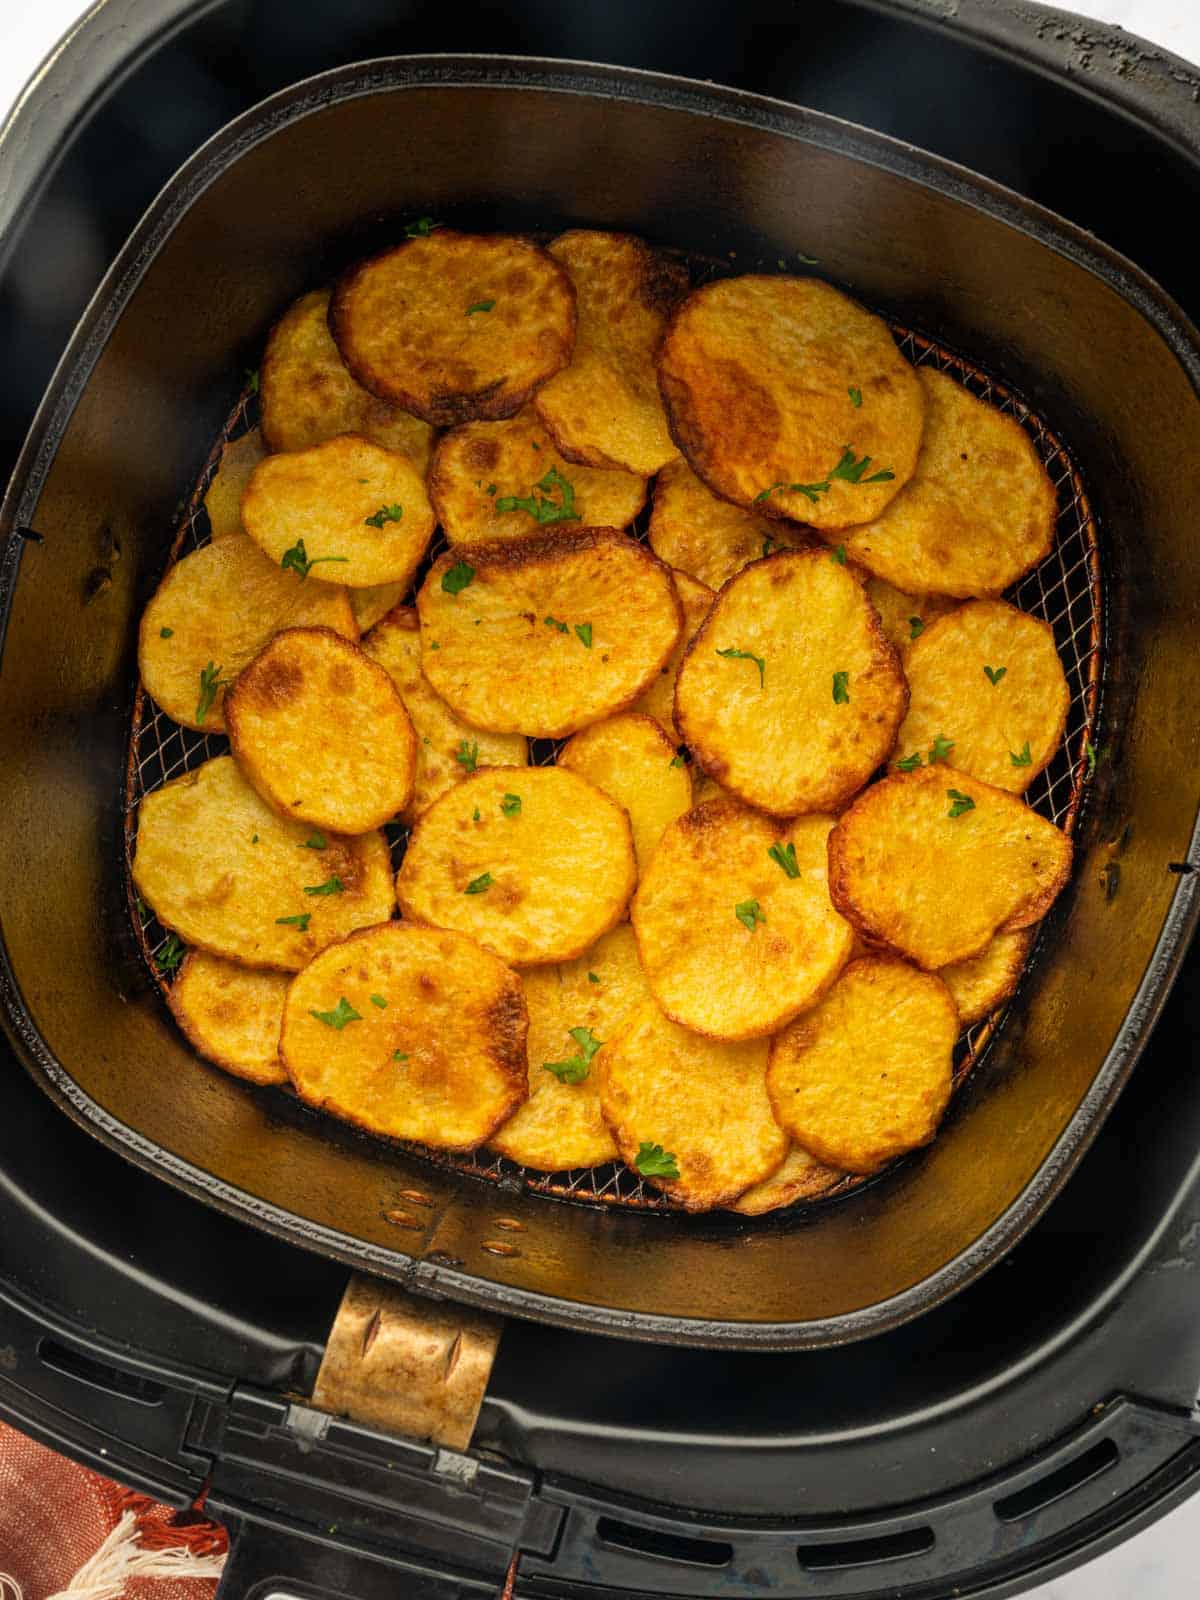 Crispy sliced potatoes in the air fryer garnished with parsley.